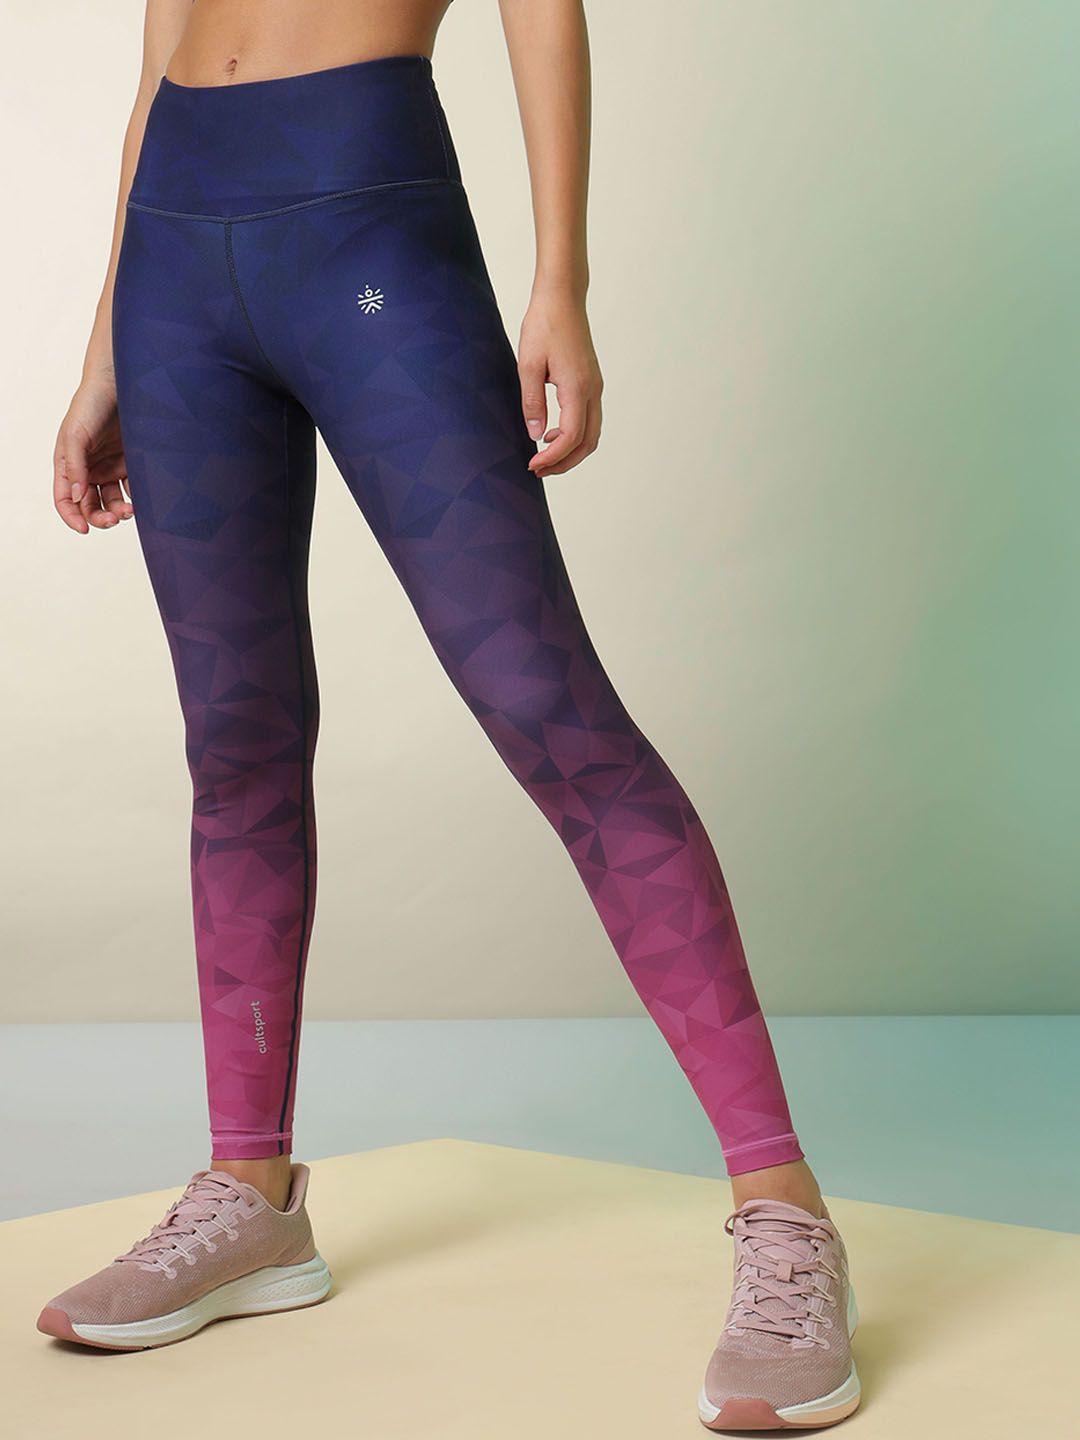 Cultsport Women Navy Blue & Burgundy Ombre Sports Tights Price in India